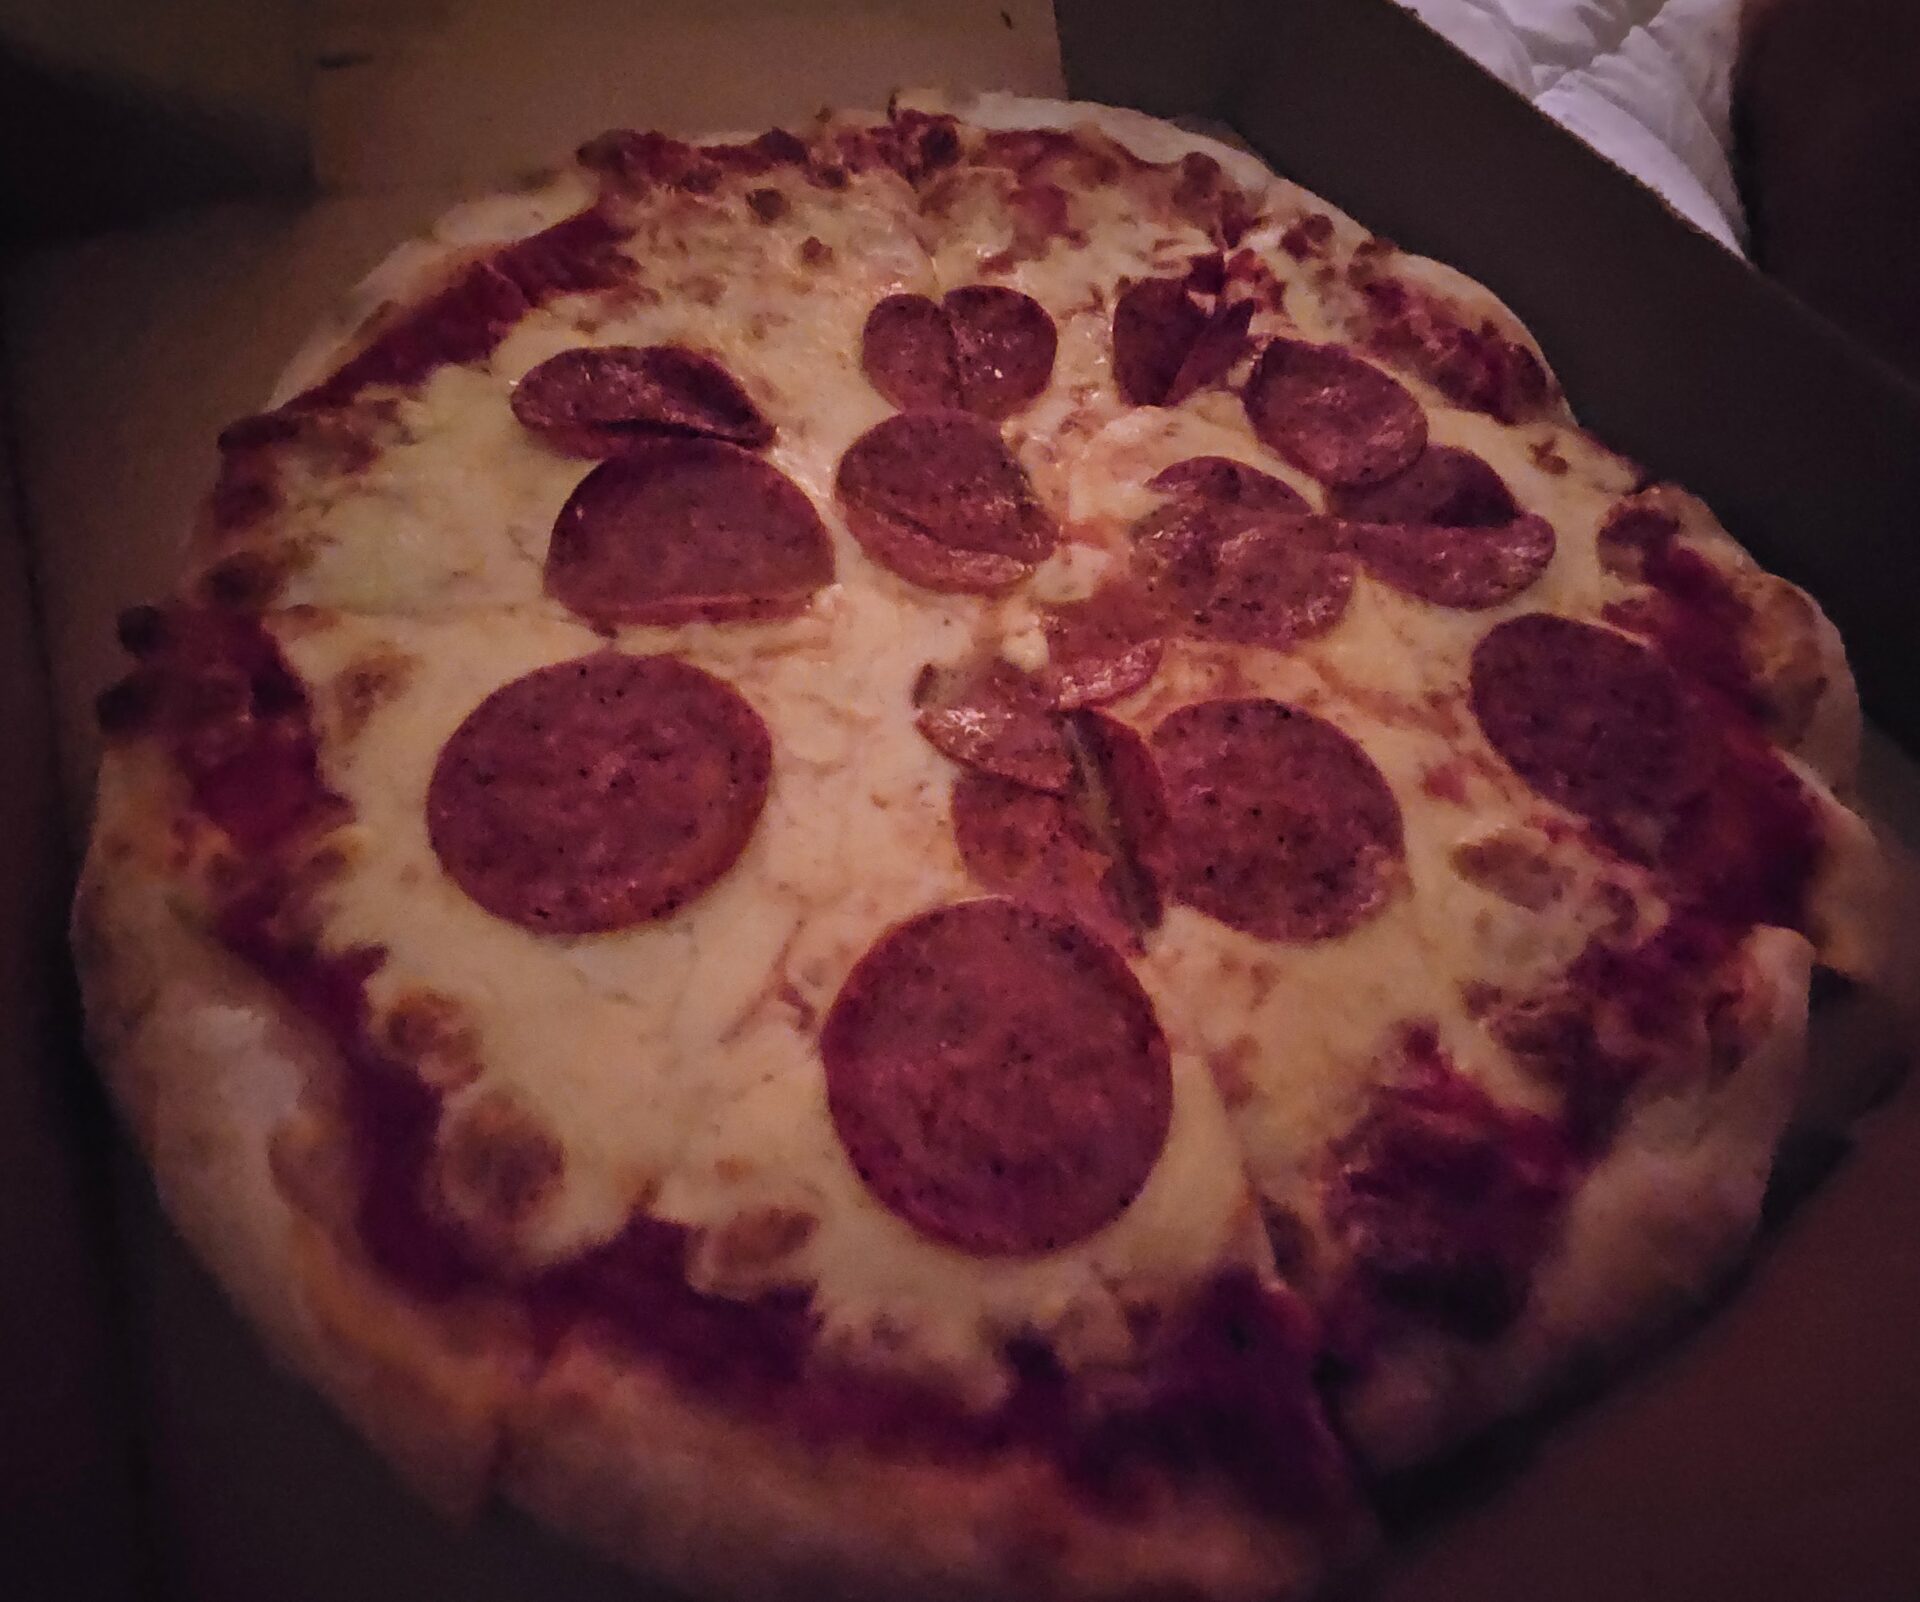 a pepperoni pizza in a box